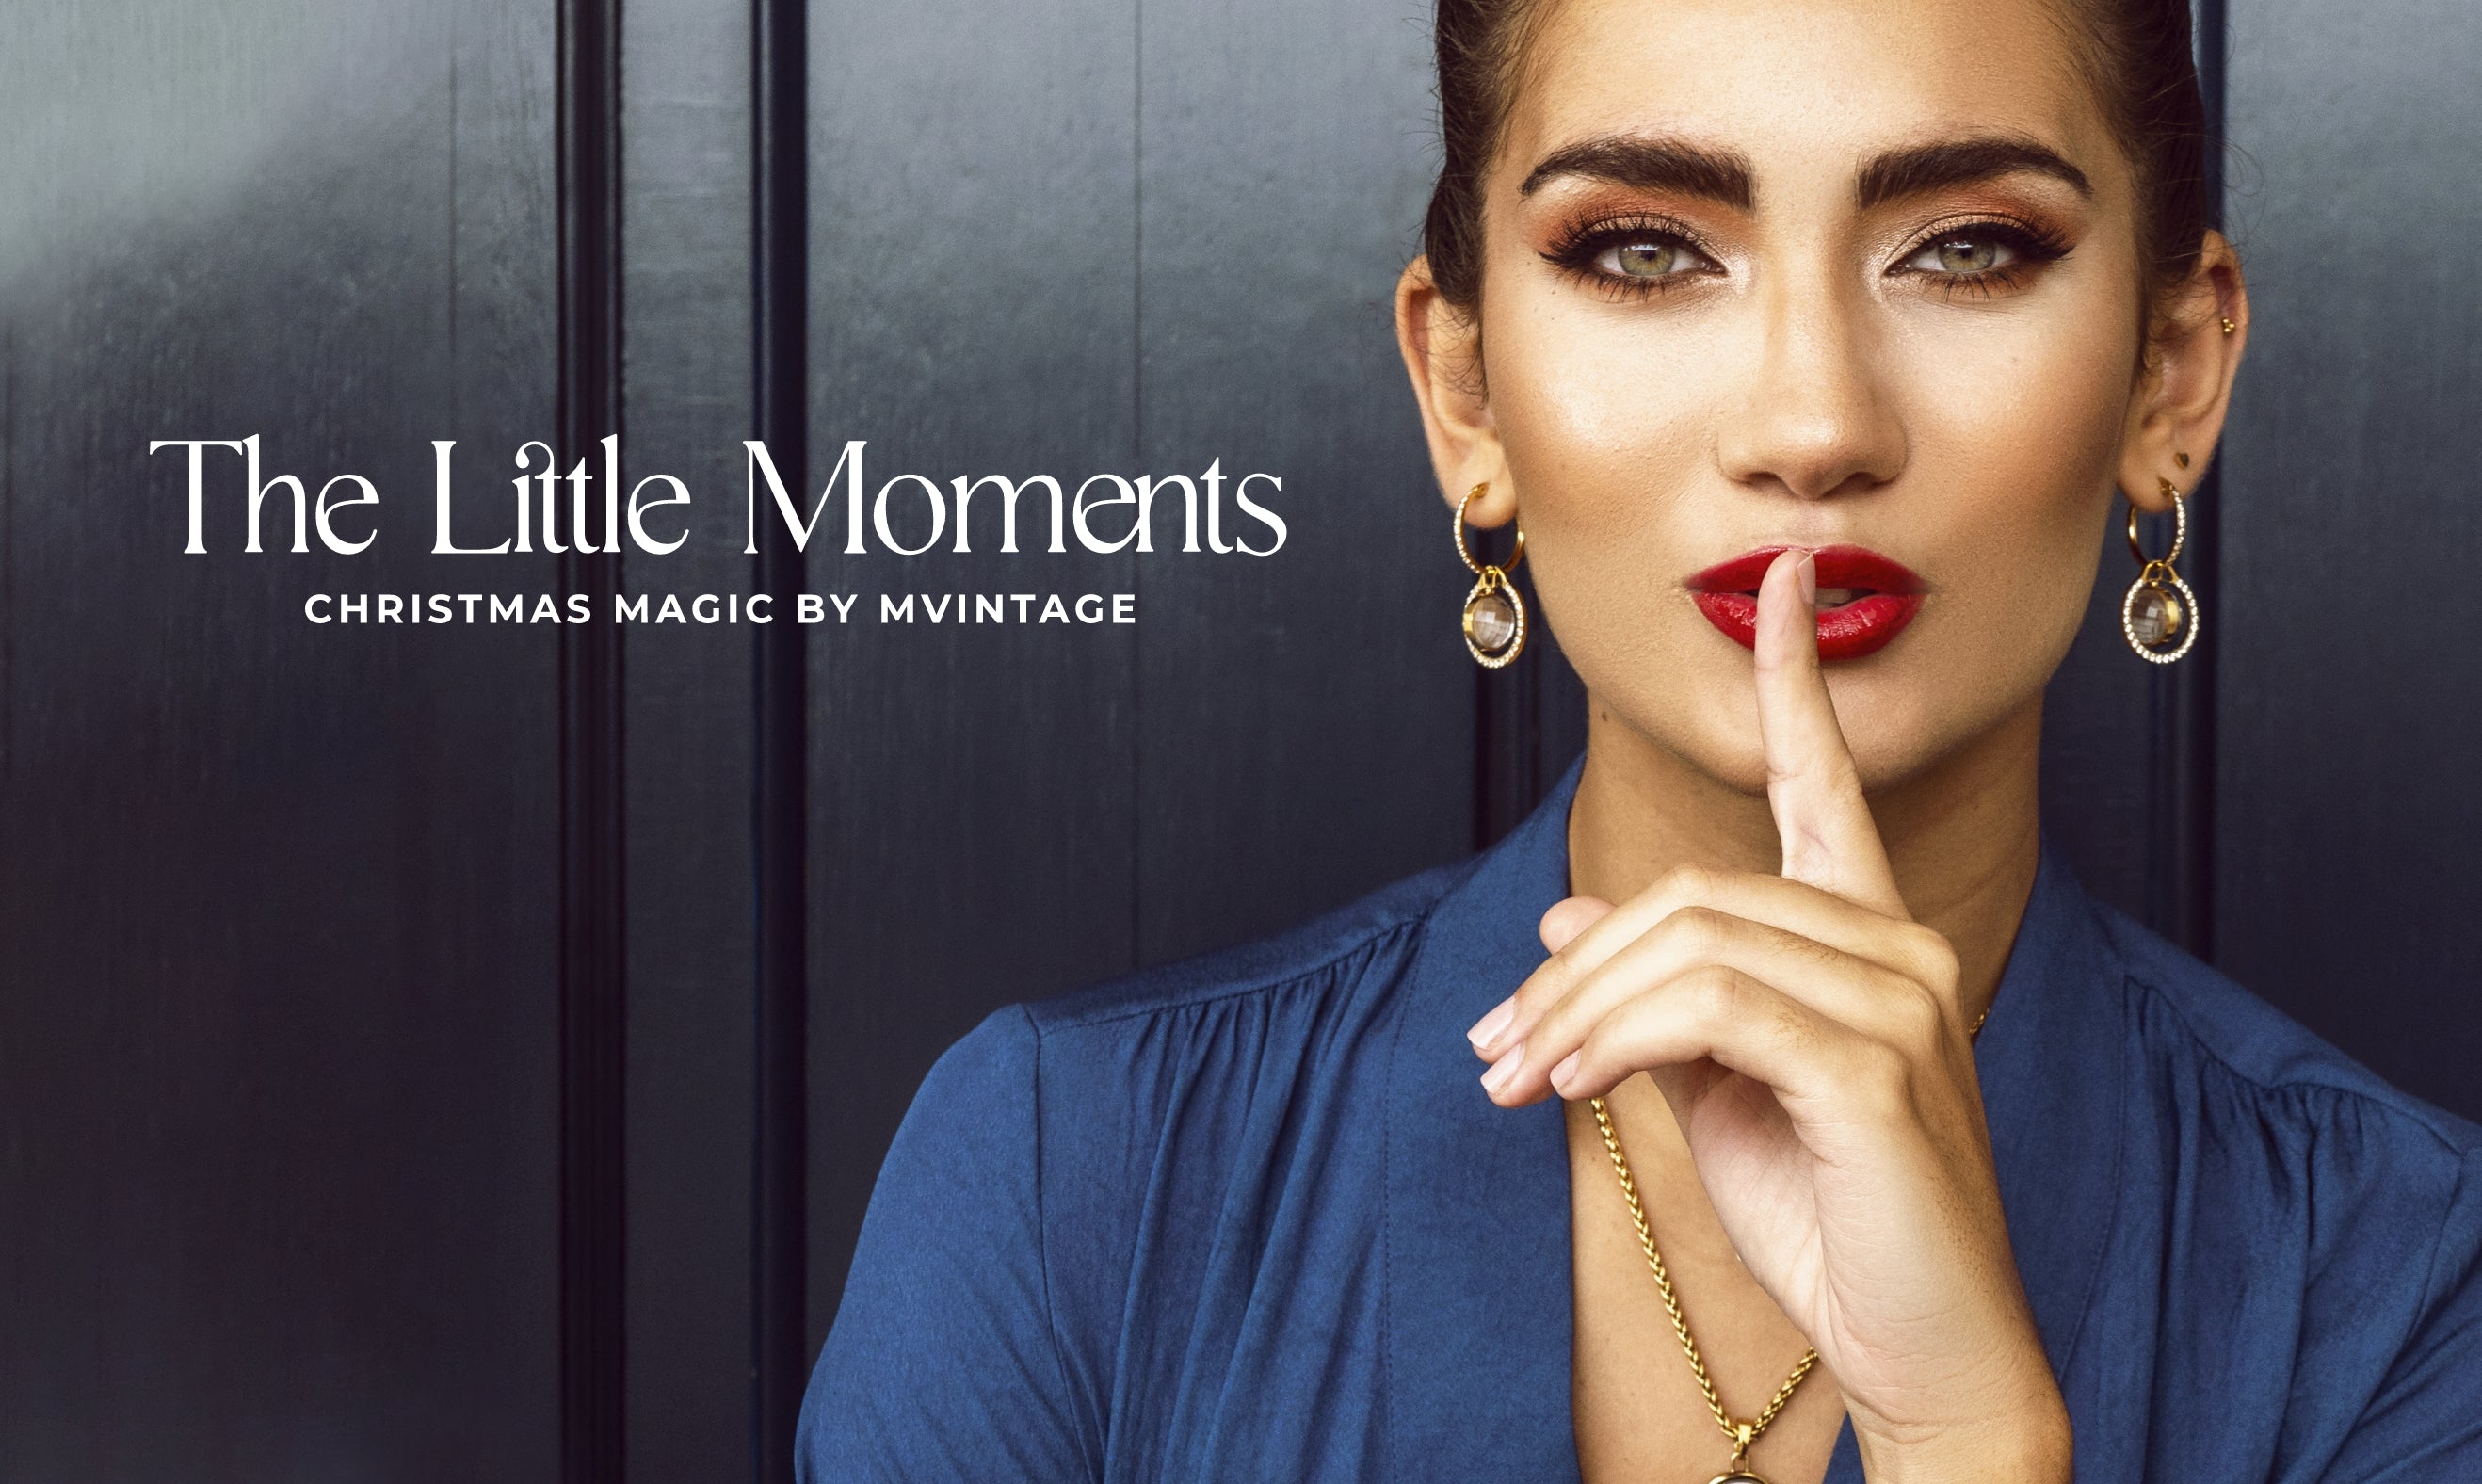 The Little Moments - Christmas Magic by Mvintage